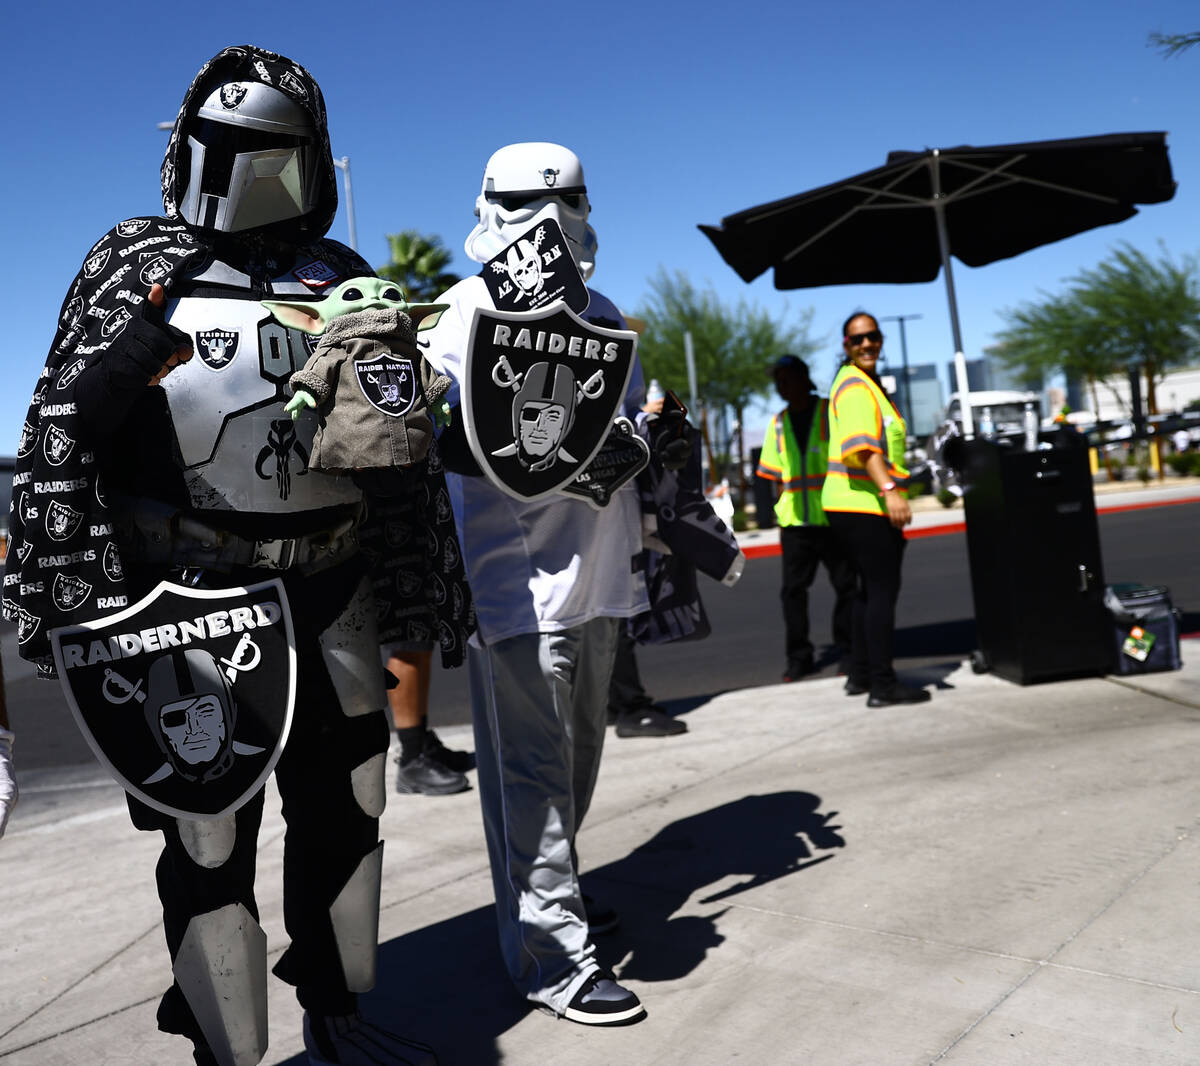 Fans wearing costumes walk around before an NFL football game between the Raiders and the Balti ...